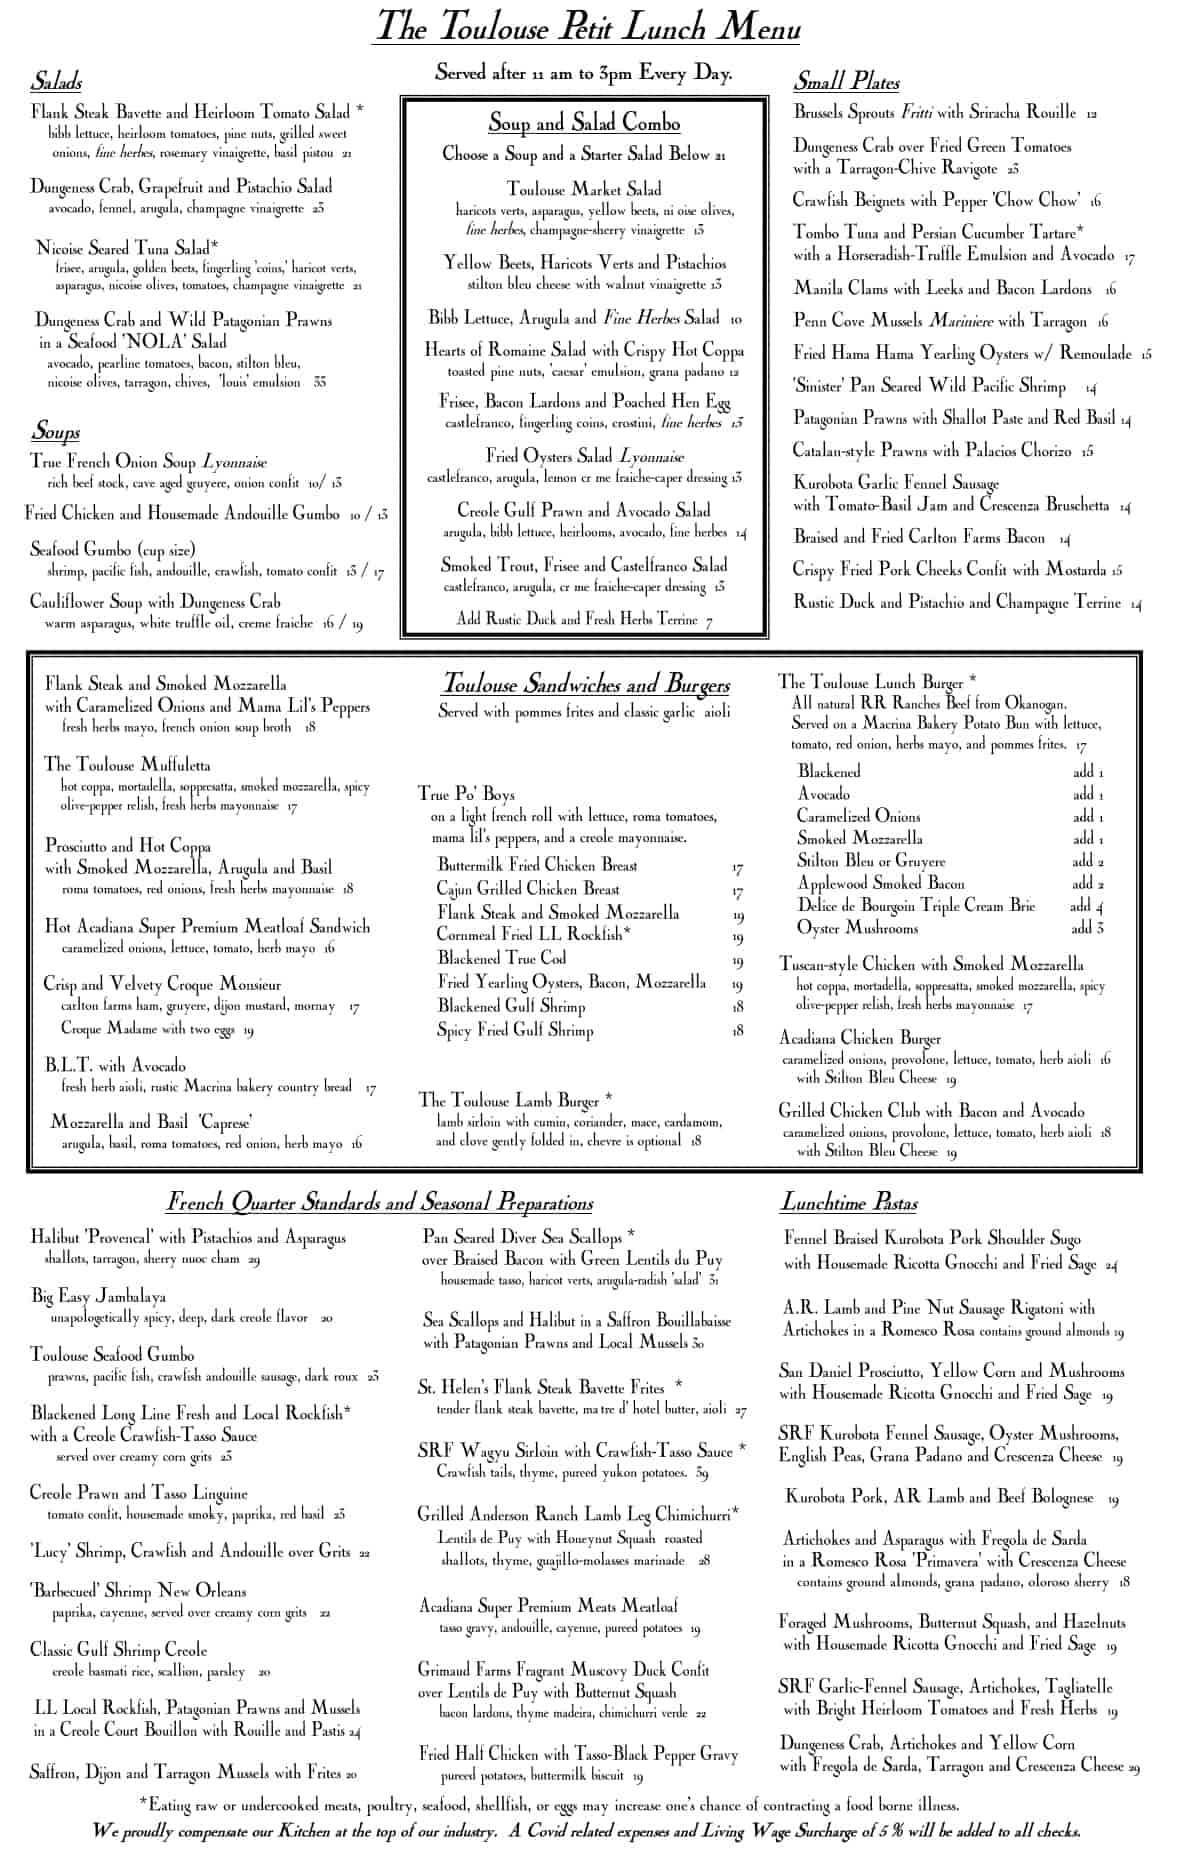 Toulouse Petit Kitchen and Lounge Brunch and Daytime Menu